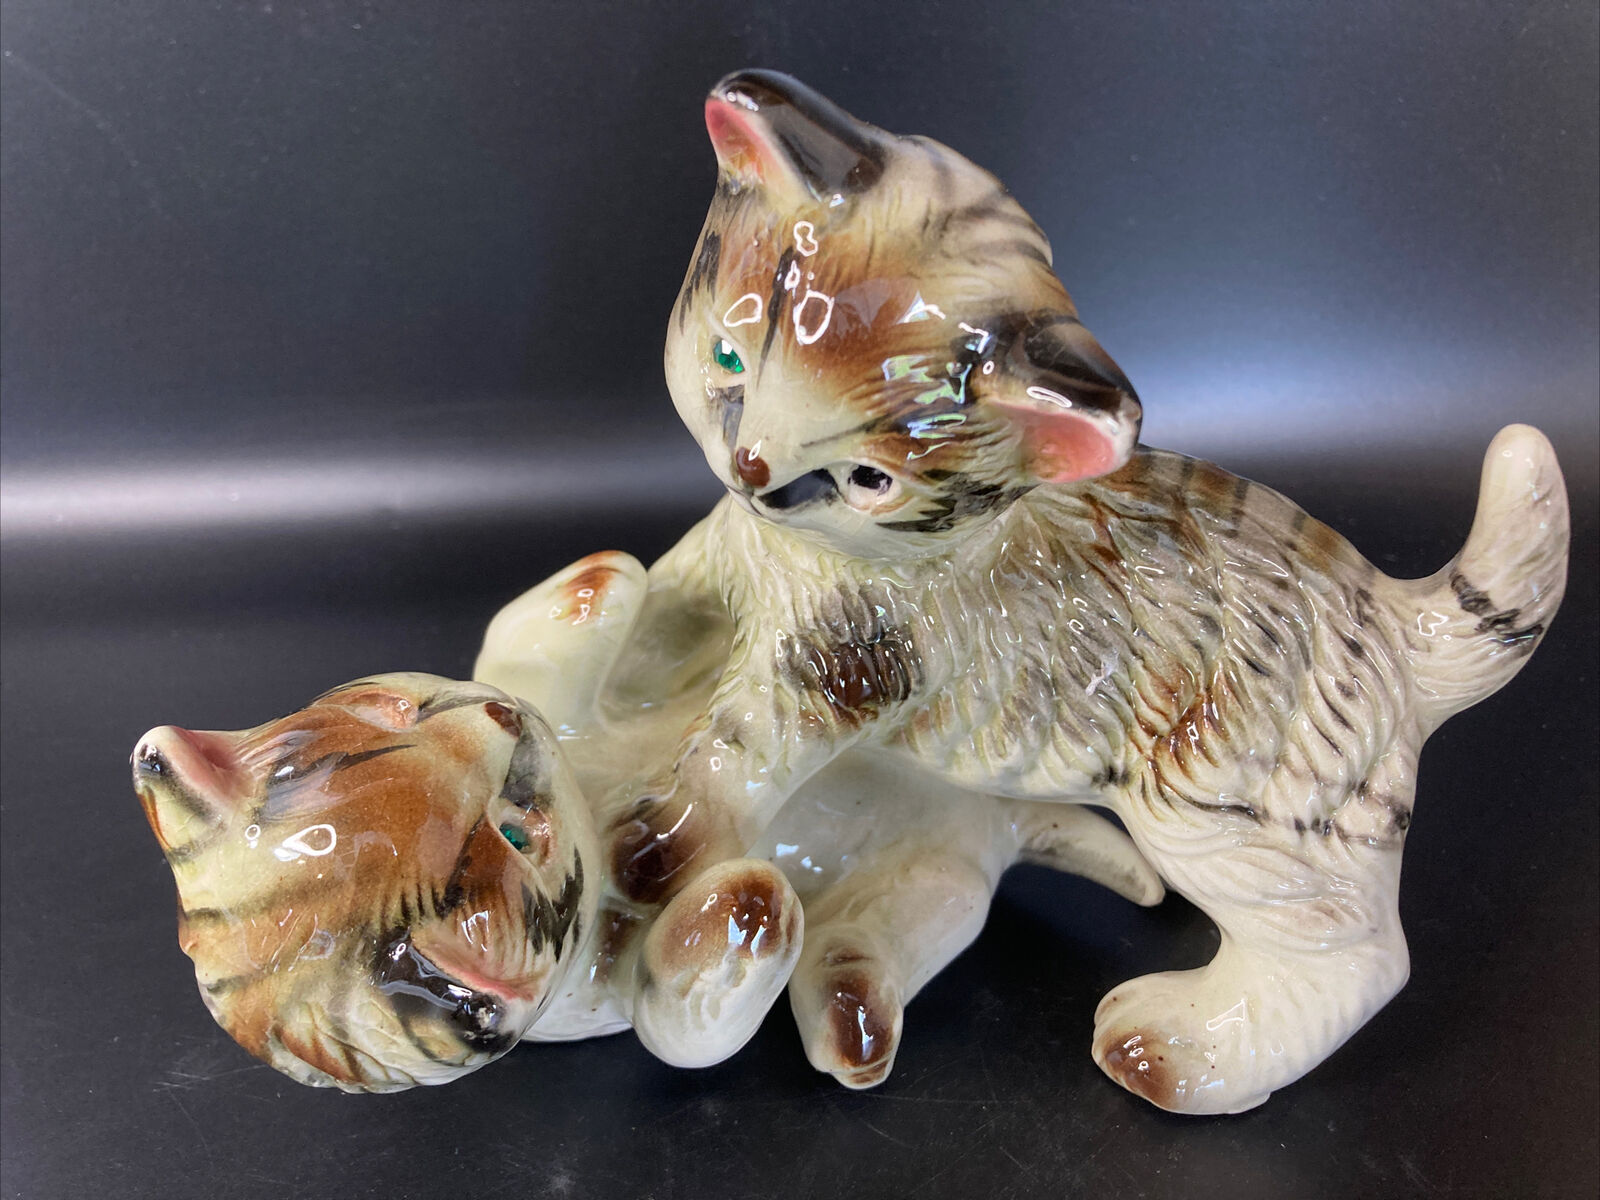 Vintage Enesco romping Wrestling kittens, hand painted Figurine 7”x5” Cats FLAW